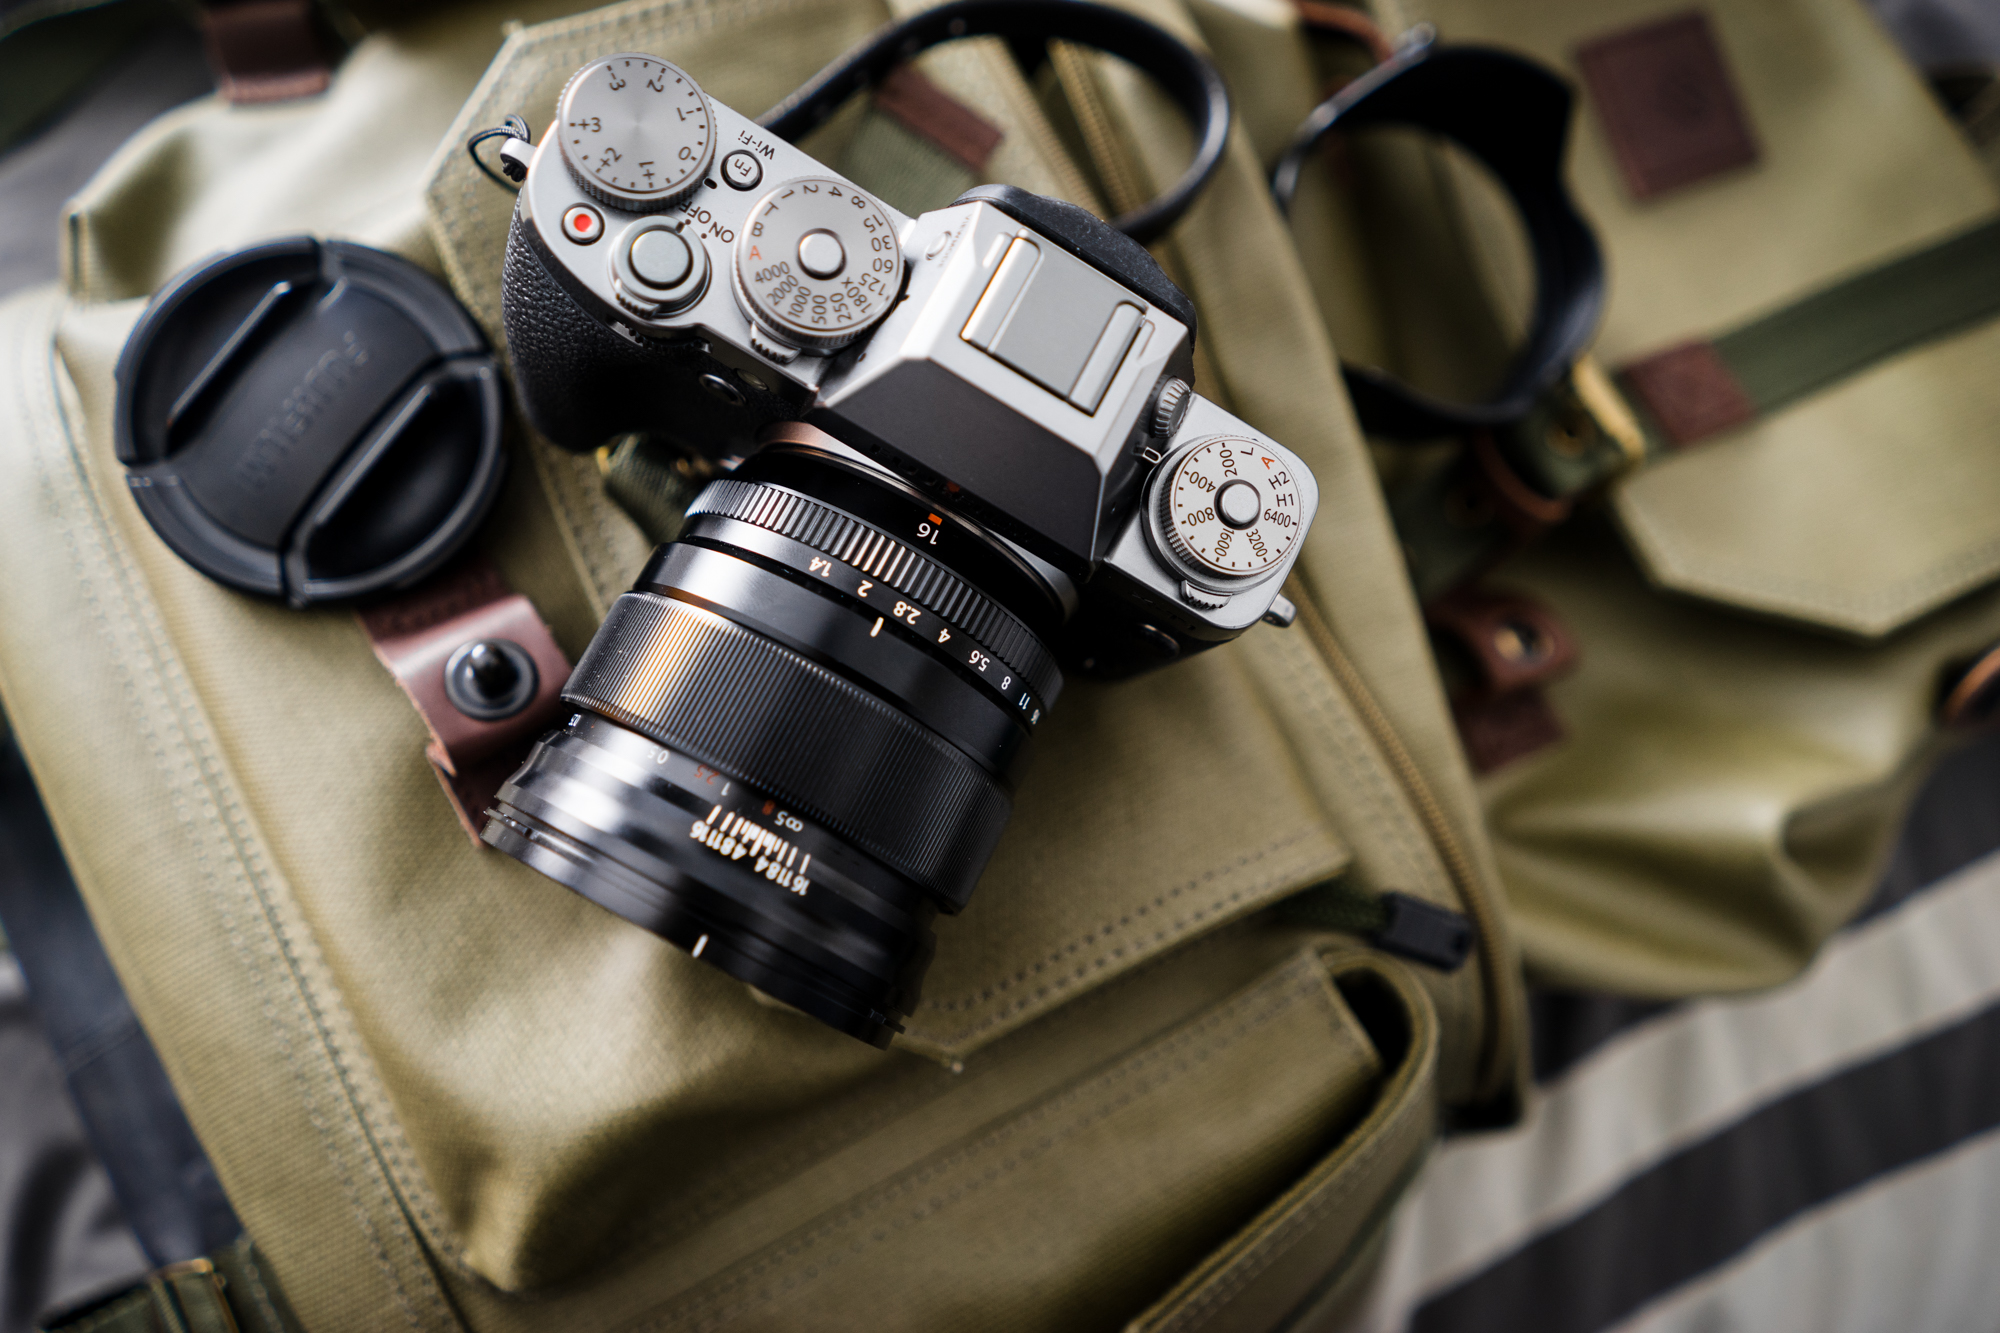 We've Updated our Fujifilm XT1 Review for Firmware 4.0